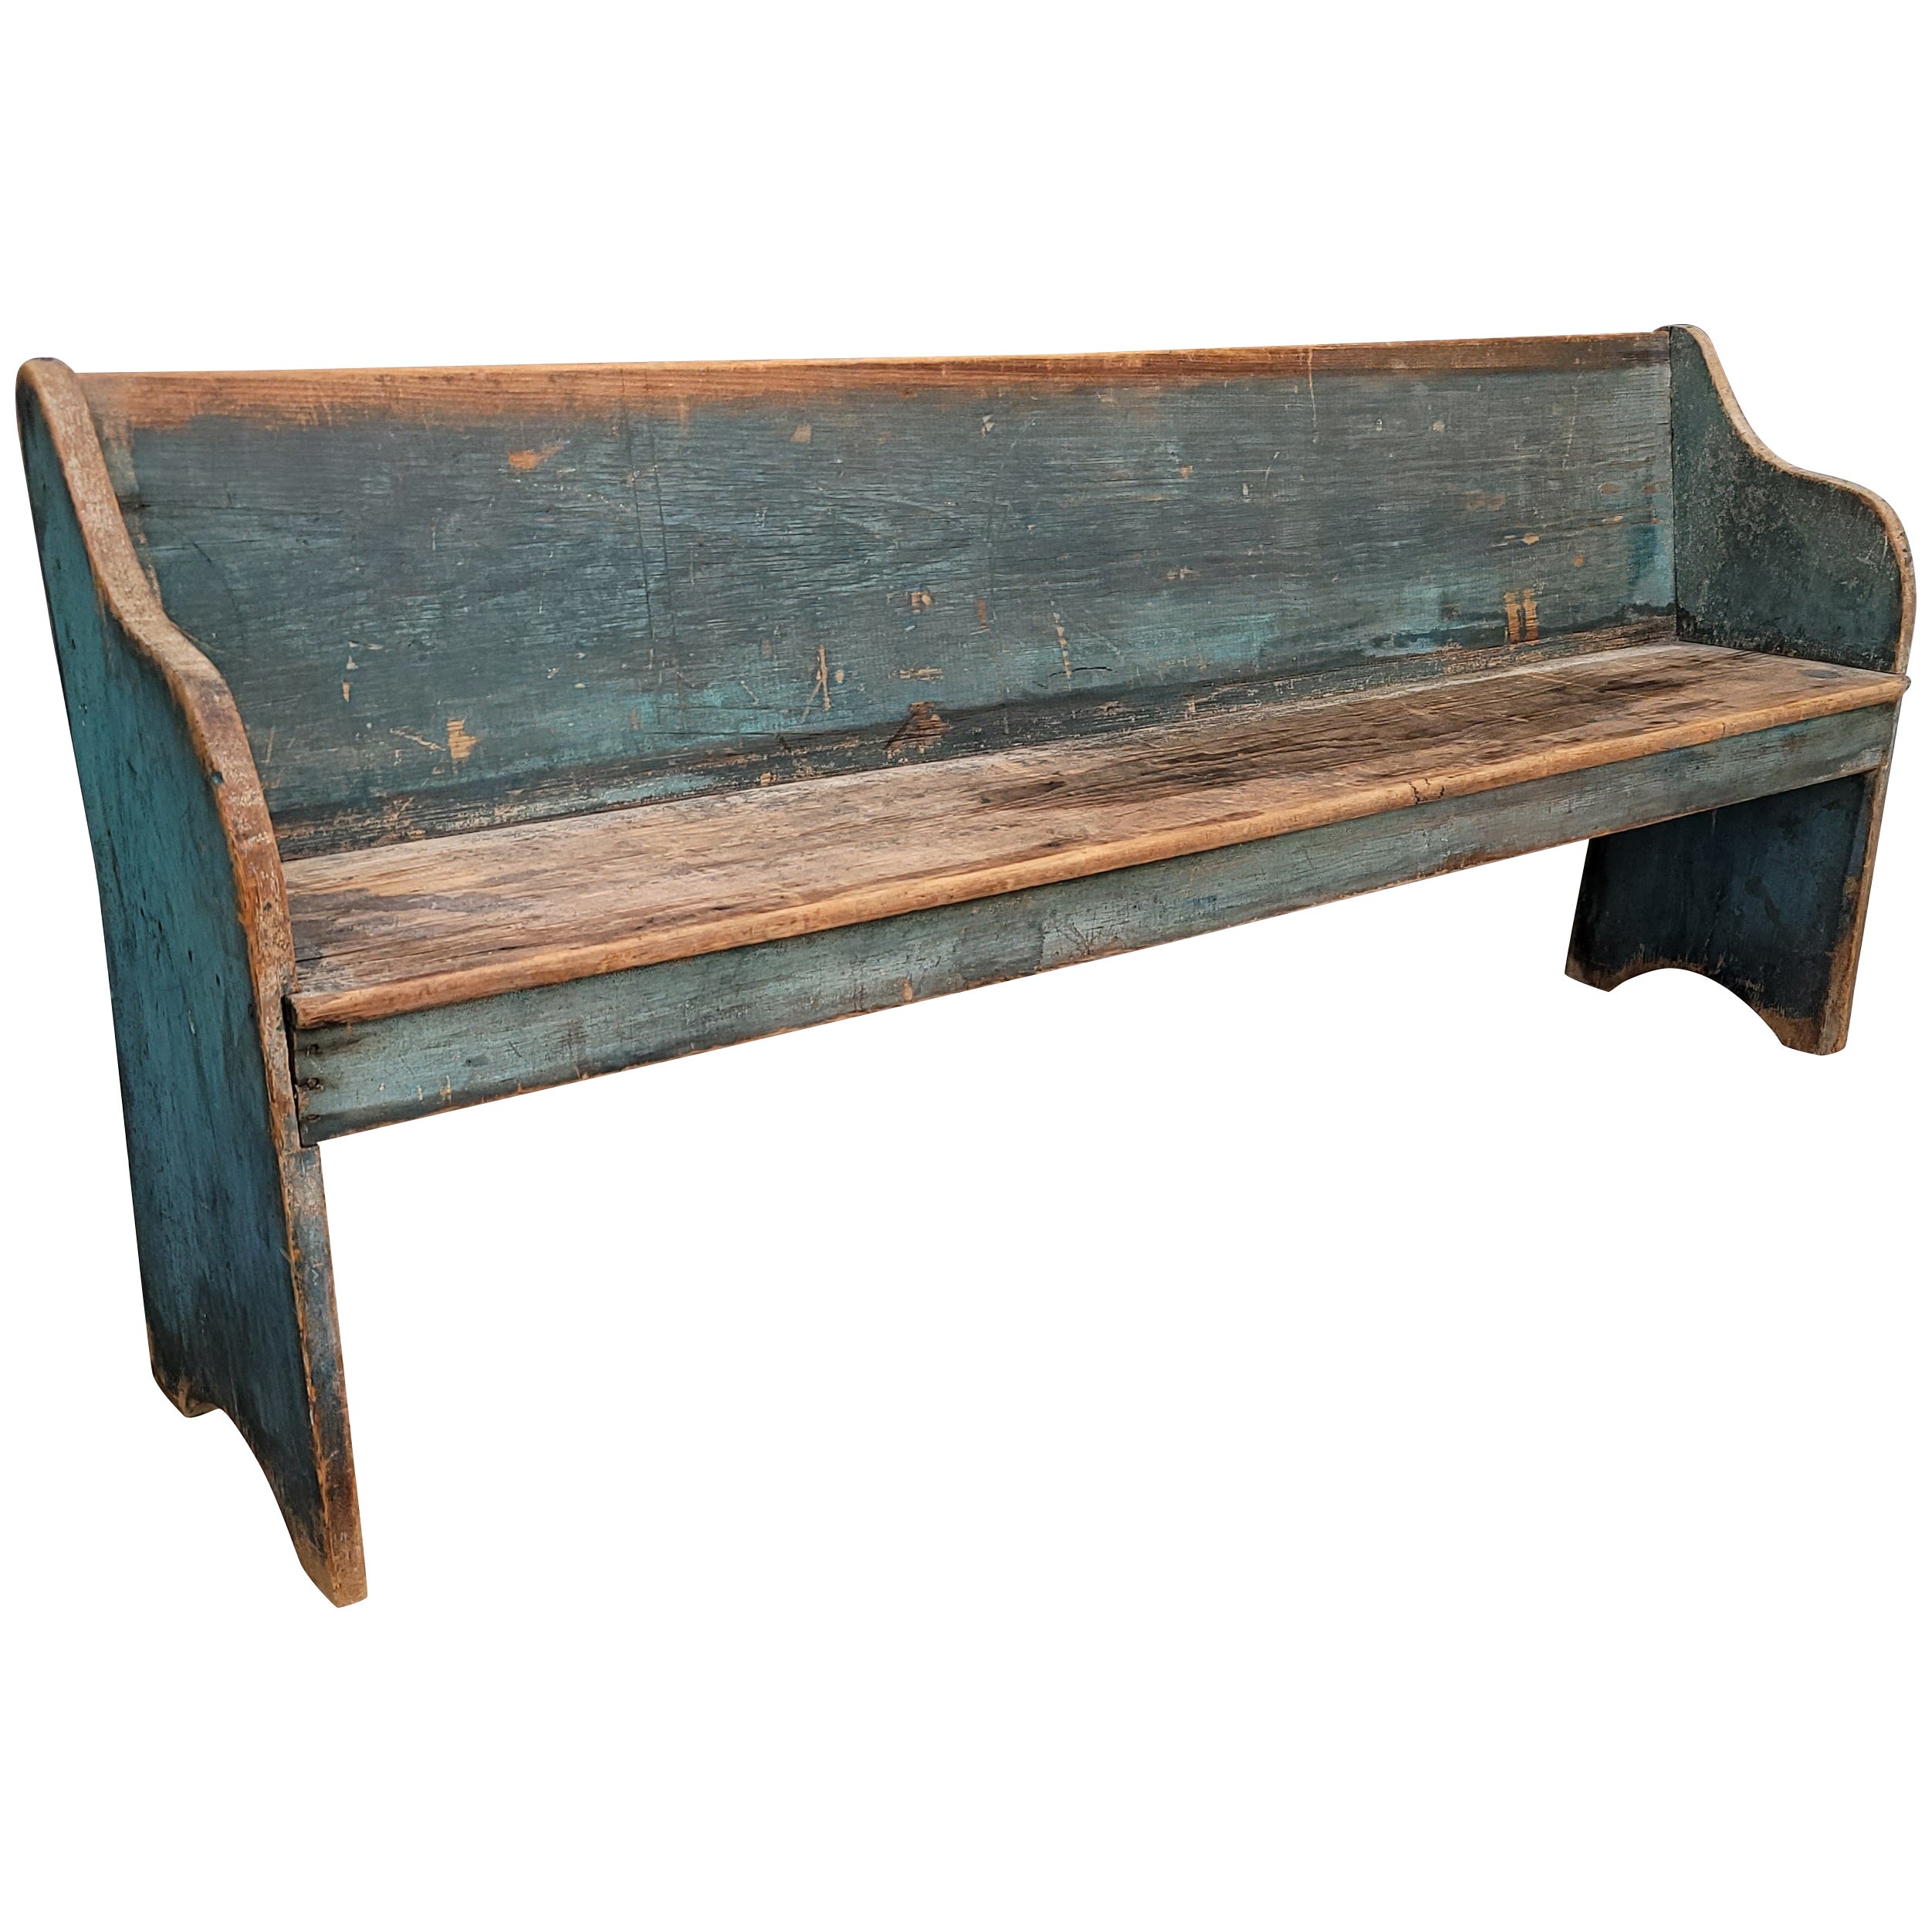 Early 19th C Original Blue Painted Bench